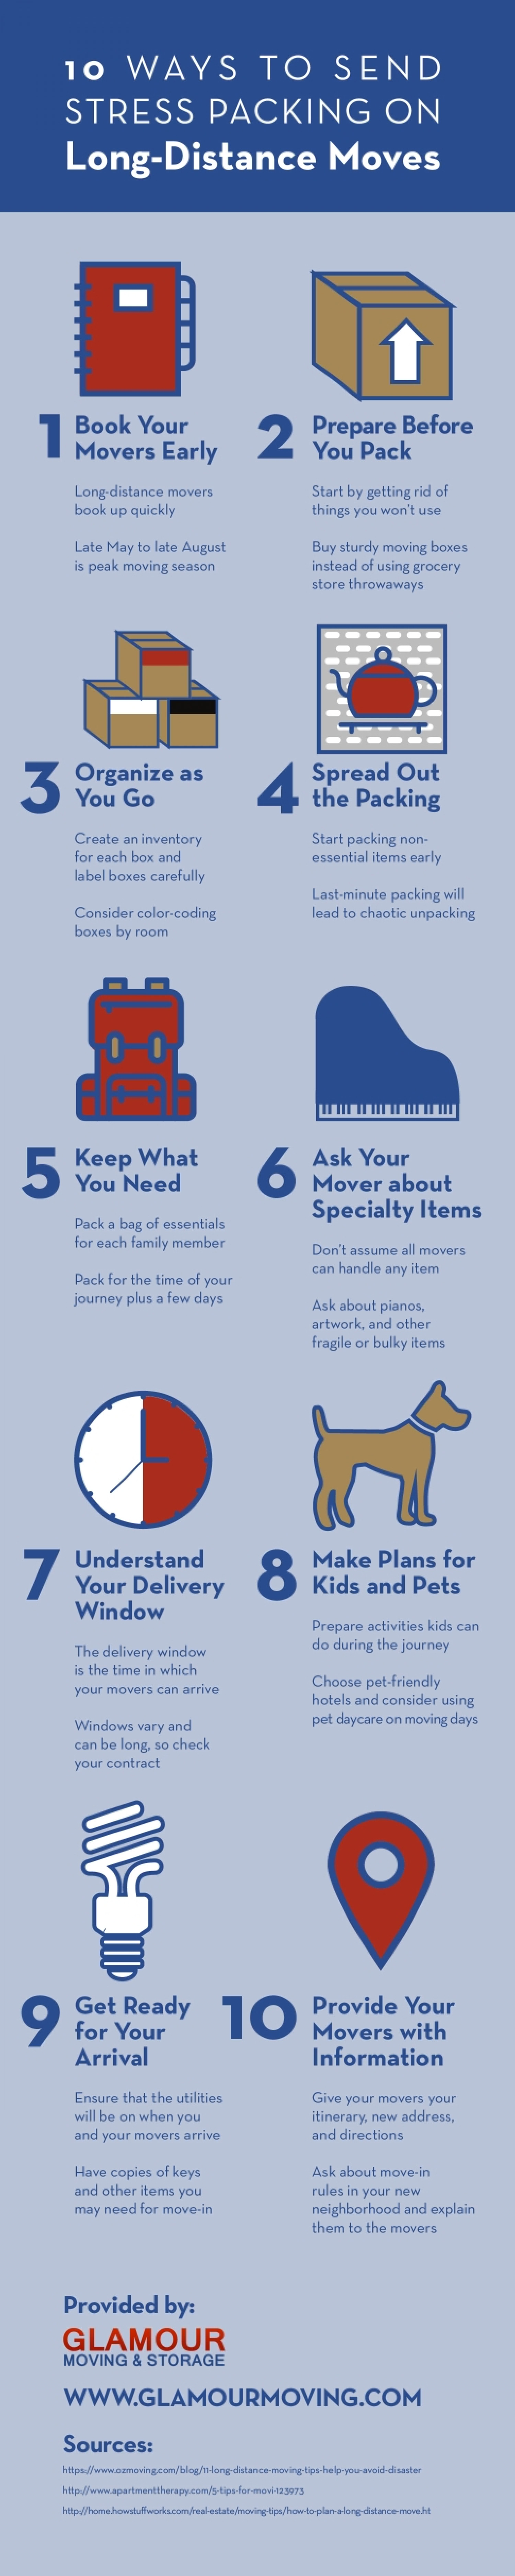 10 Ways to Send Stress Packing on Long-Distance Moves Infographic